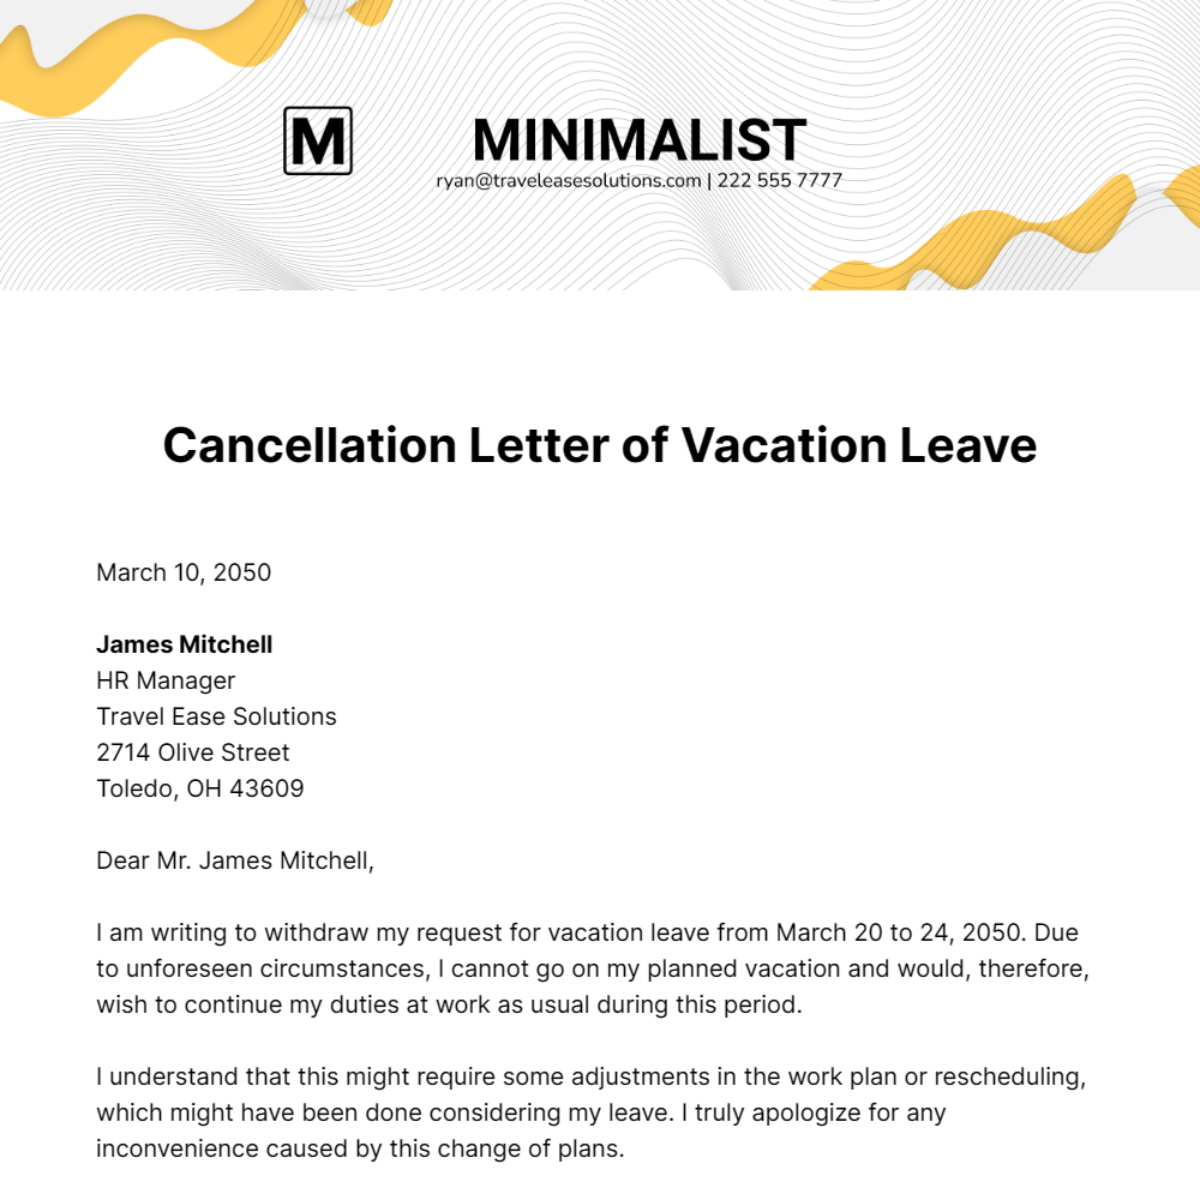 Cancellation of Vacation Leave Letter Template